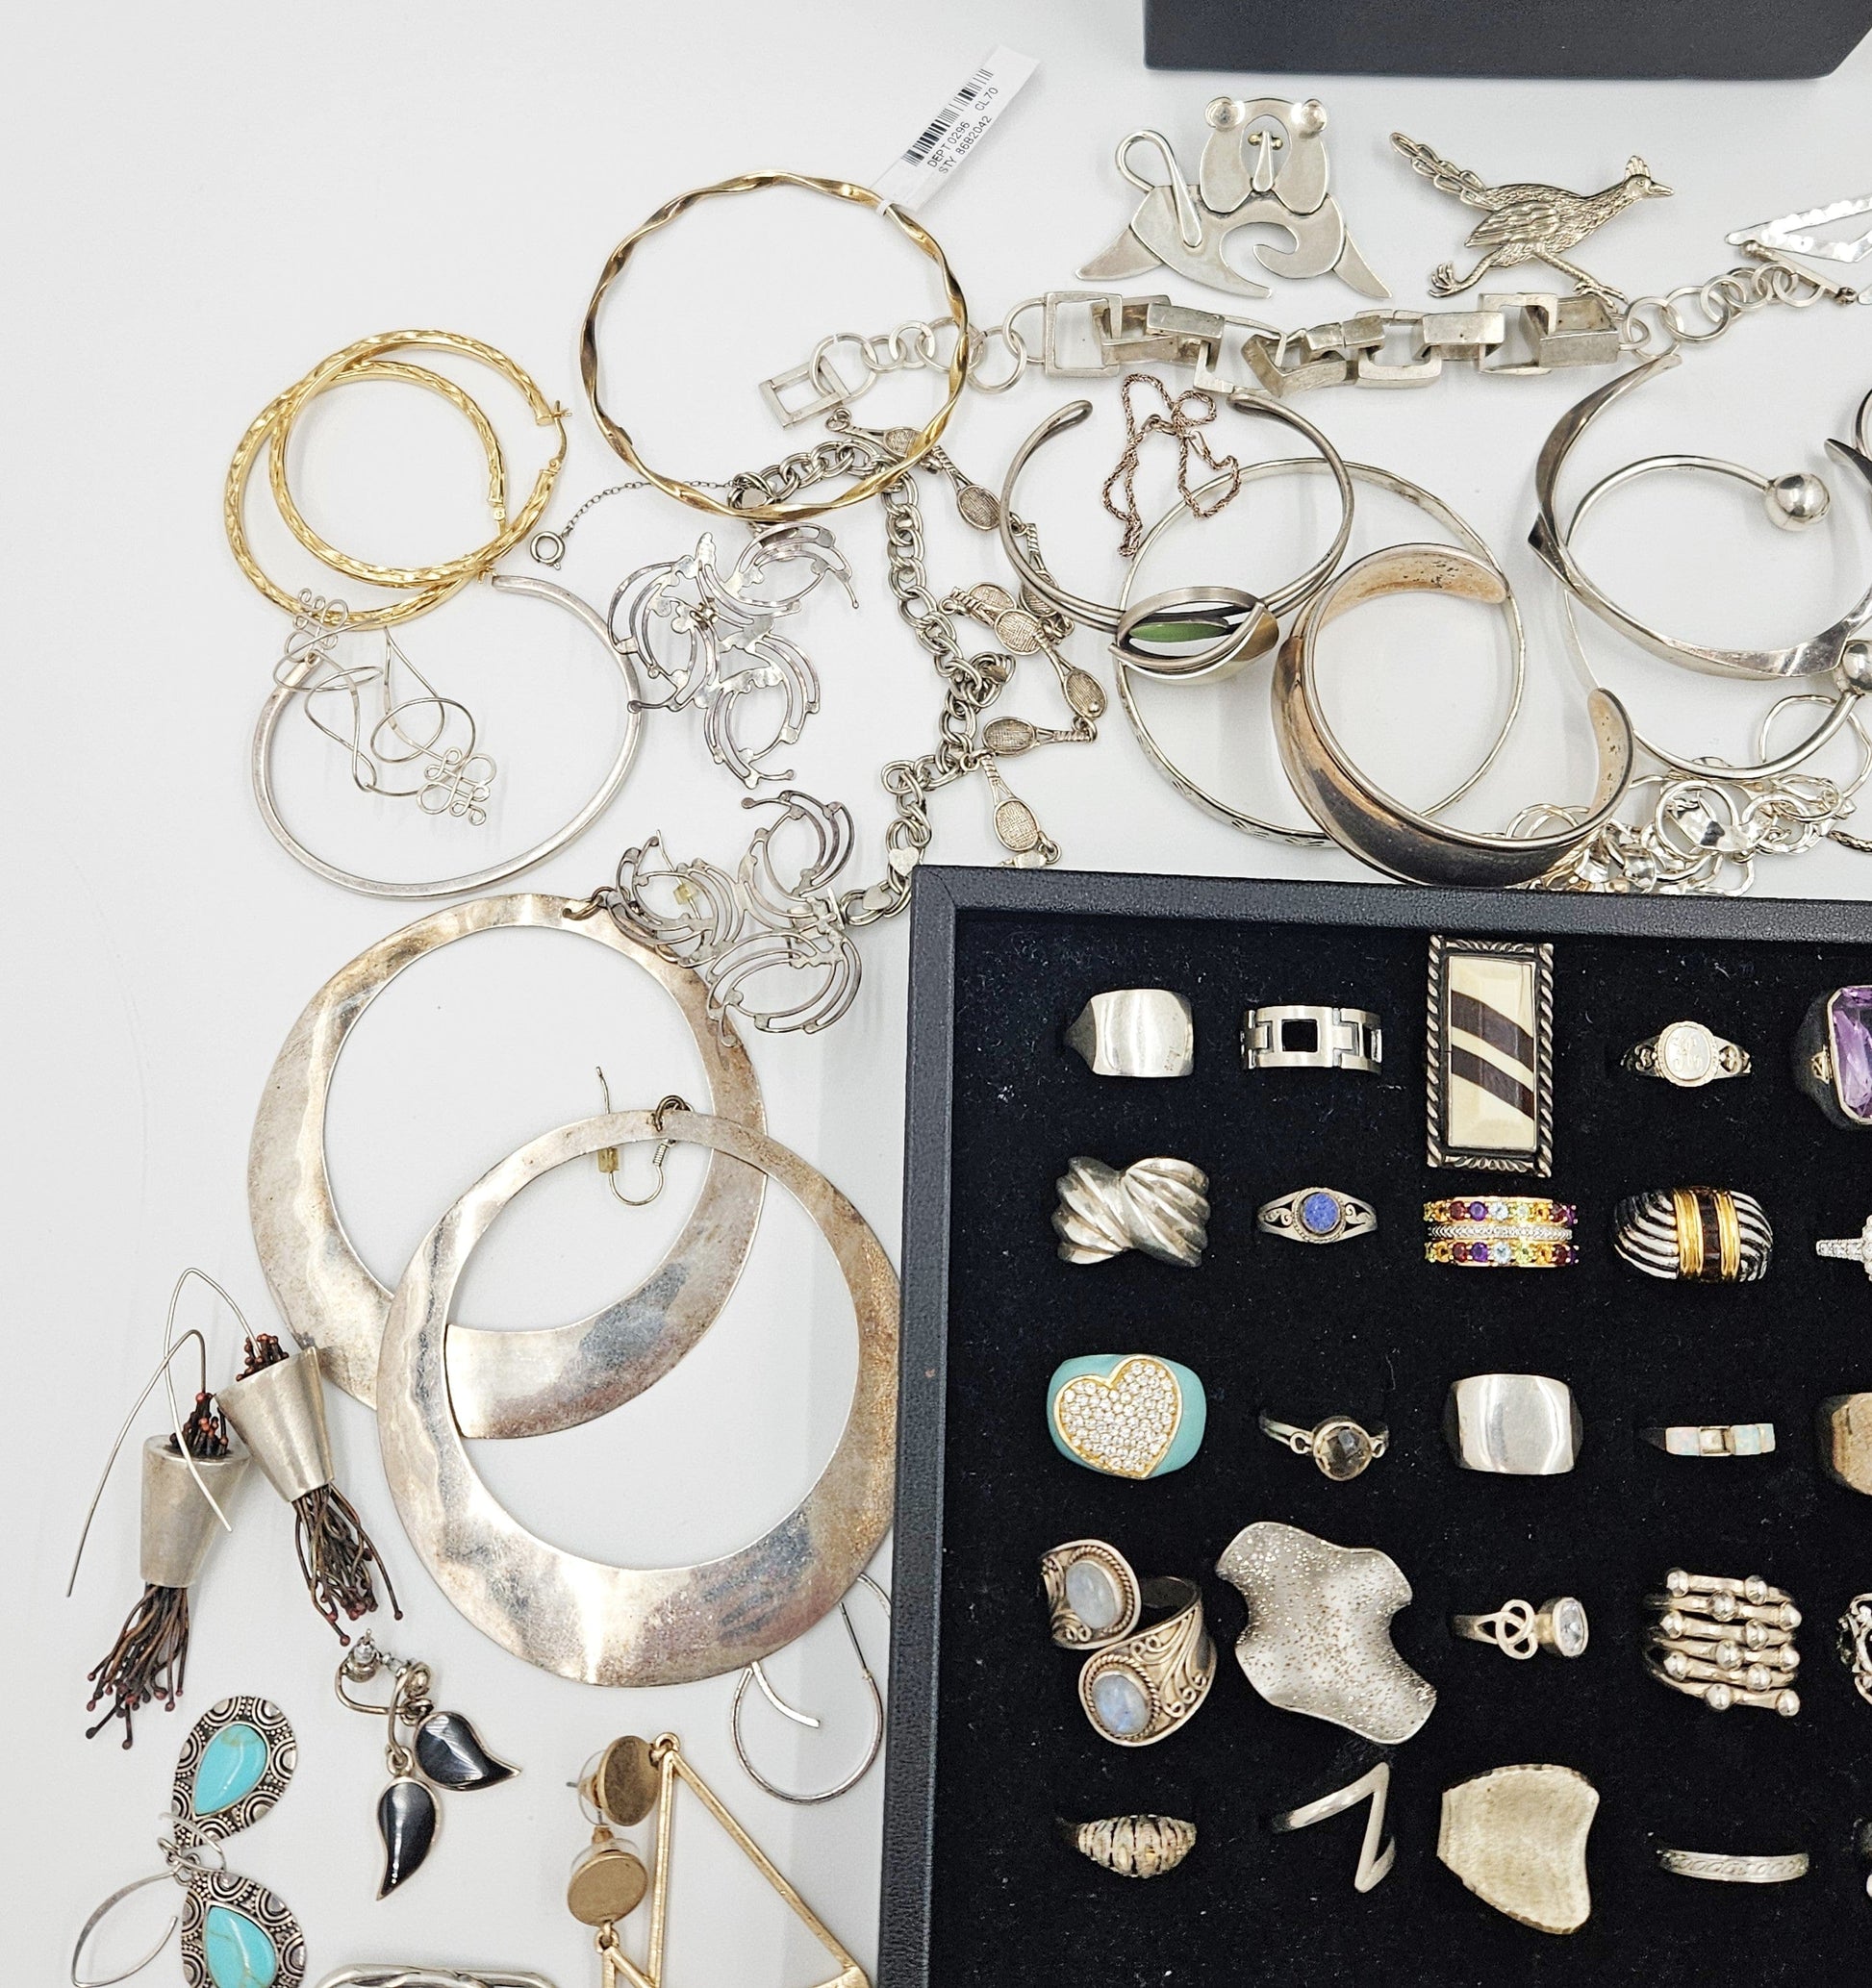 Estate Silver Jewelry Huge Resellers Fine Jewelry Lot 200+ Pieces Sterling Semi Precious Stones More